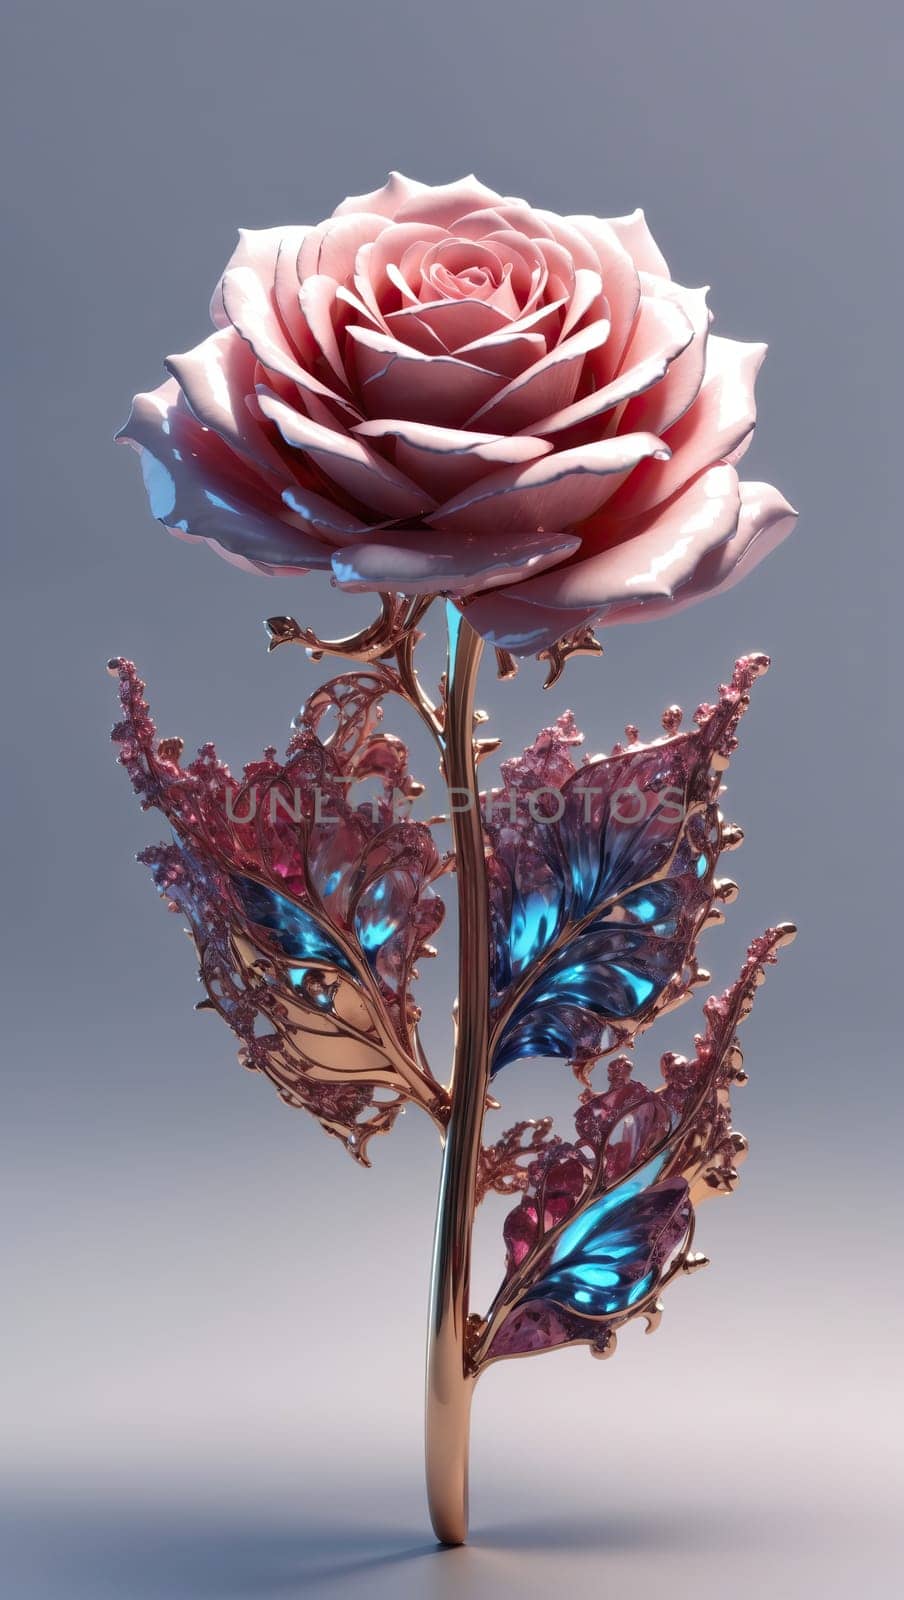 Porcelain rose with golden stem and leaves by applesstock